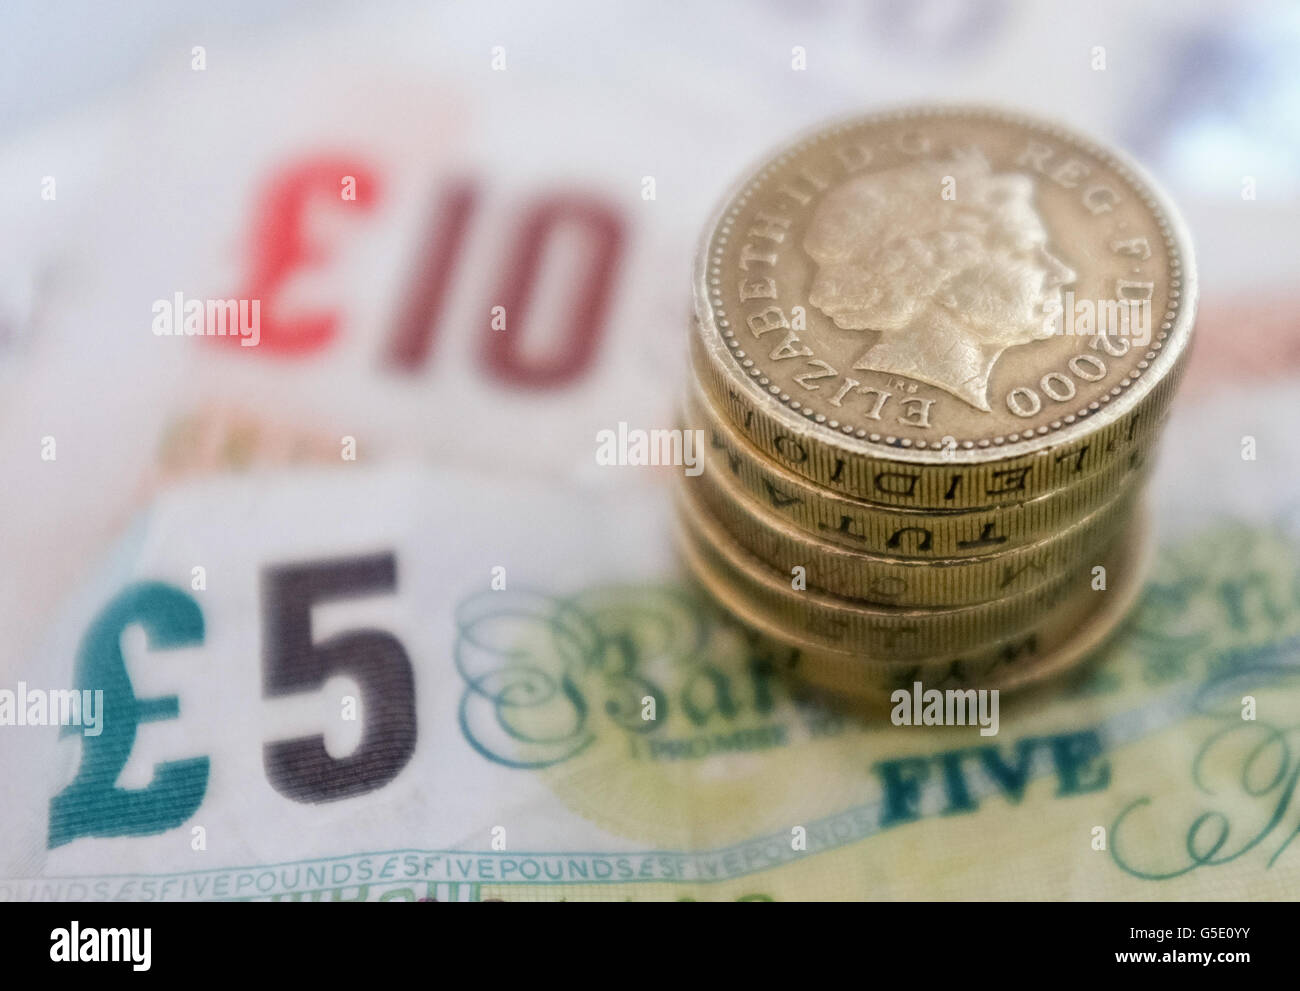 A general view of some UK pound coins and banknotes, as inflation edged lower last month with higher petrol pump prices bring offset by softer clothing costs and utility bills, official figures revealed today. Stock Photo